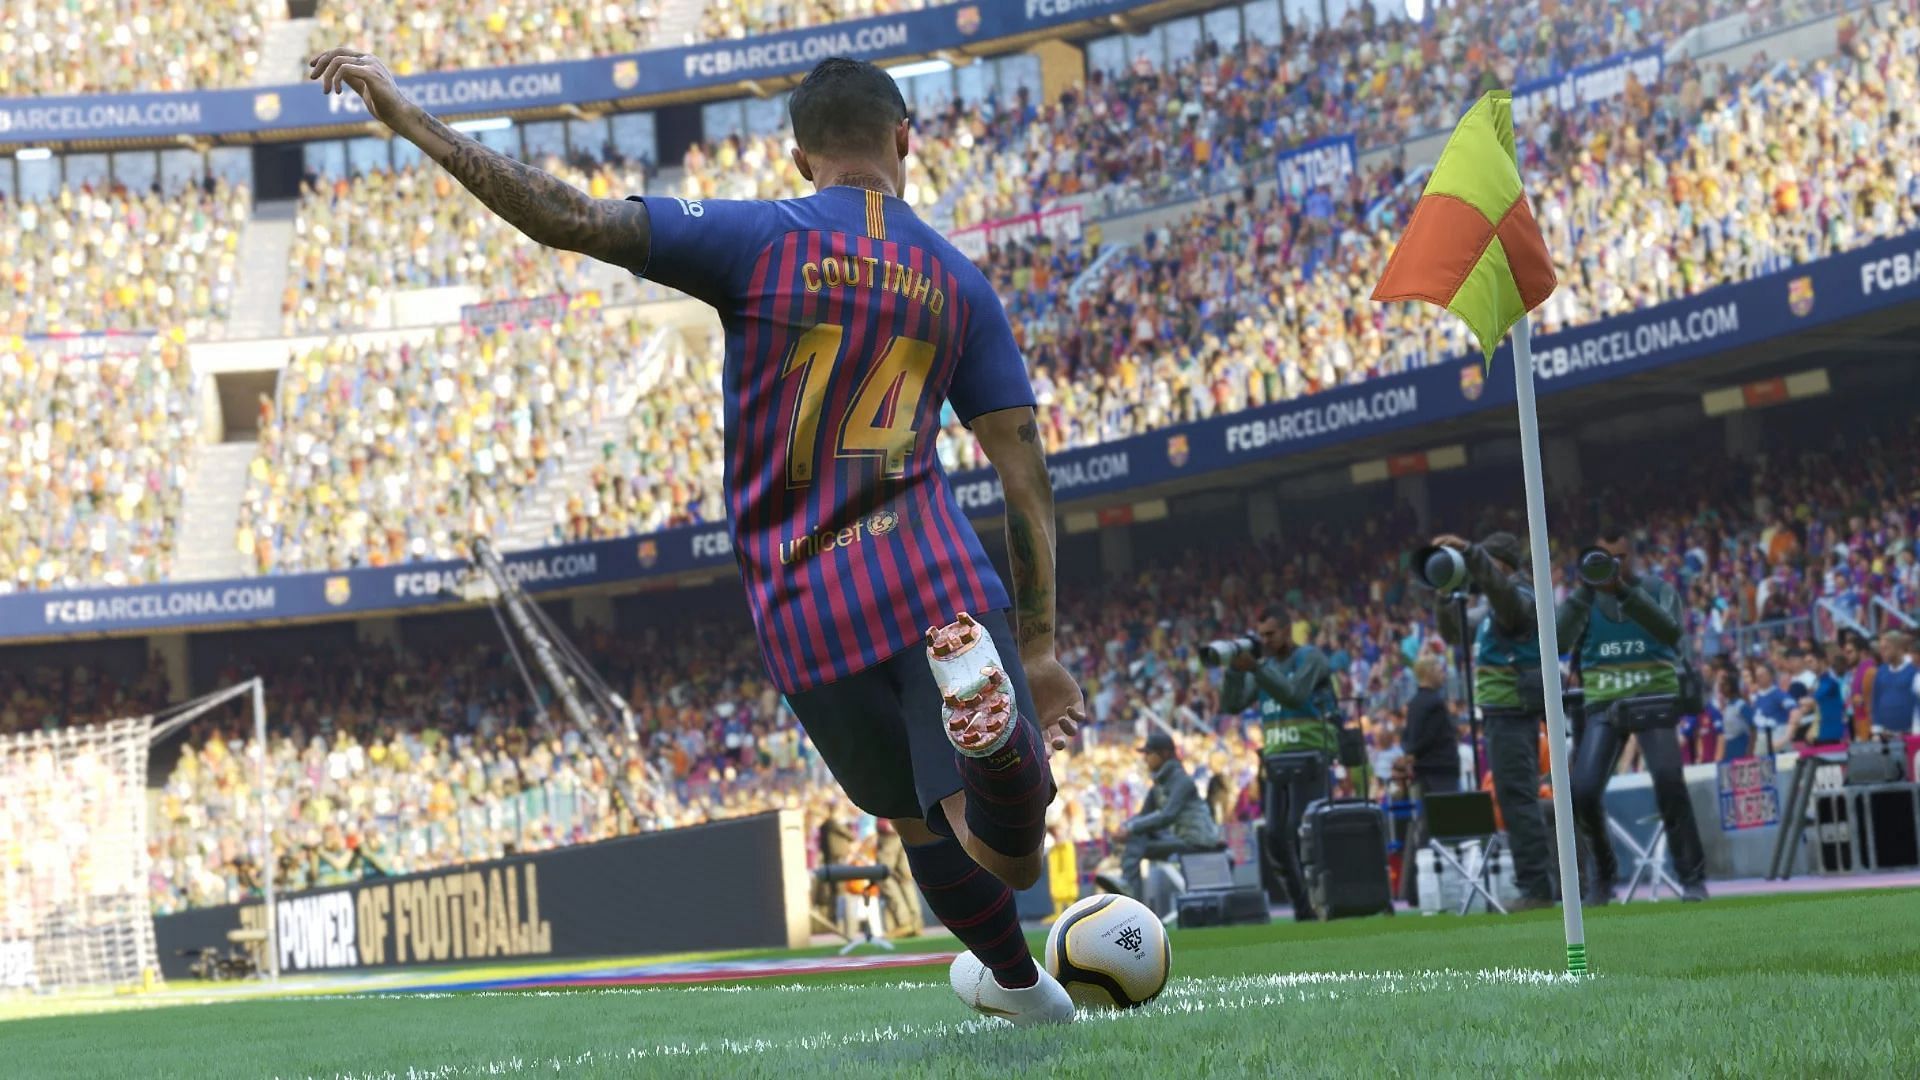 Pro Evolution Soccer 2019 was the last title in this series before changing to eFootball (Image via Konami)